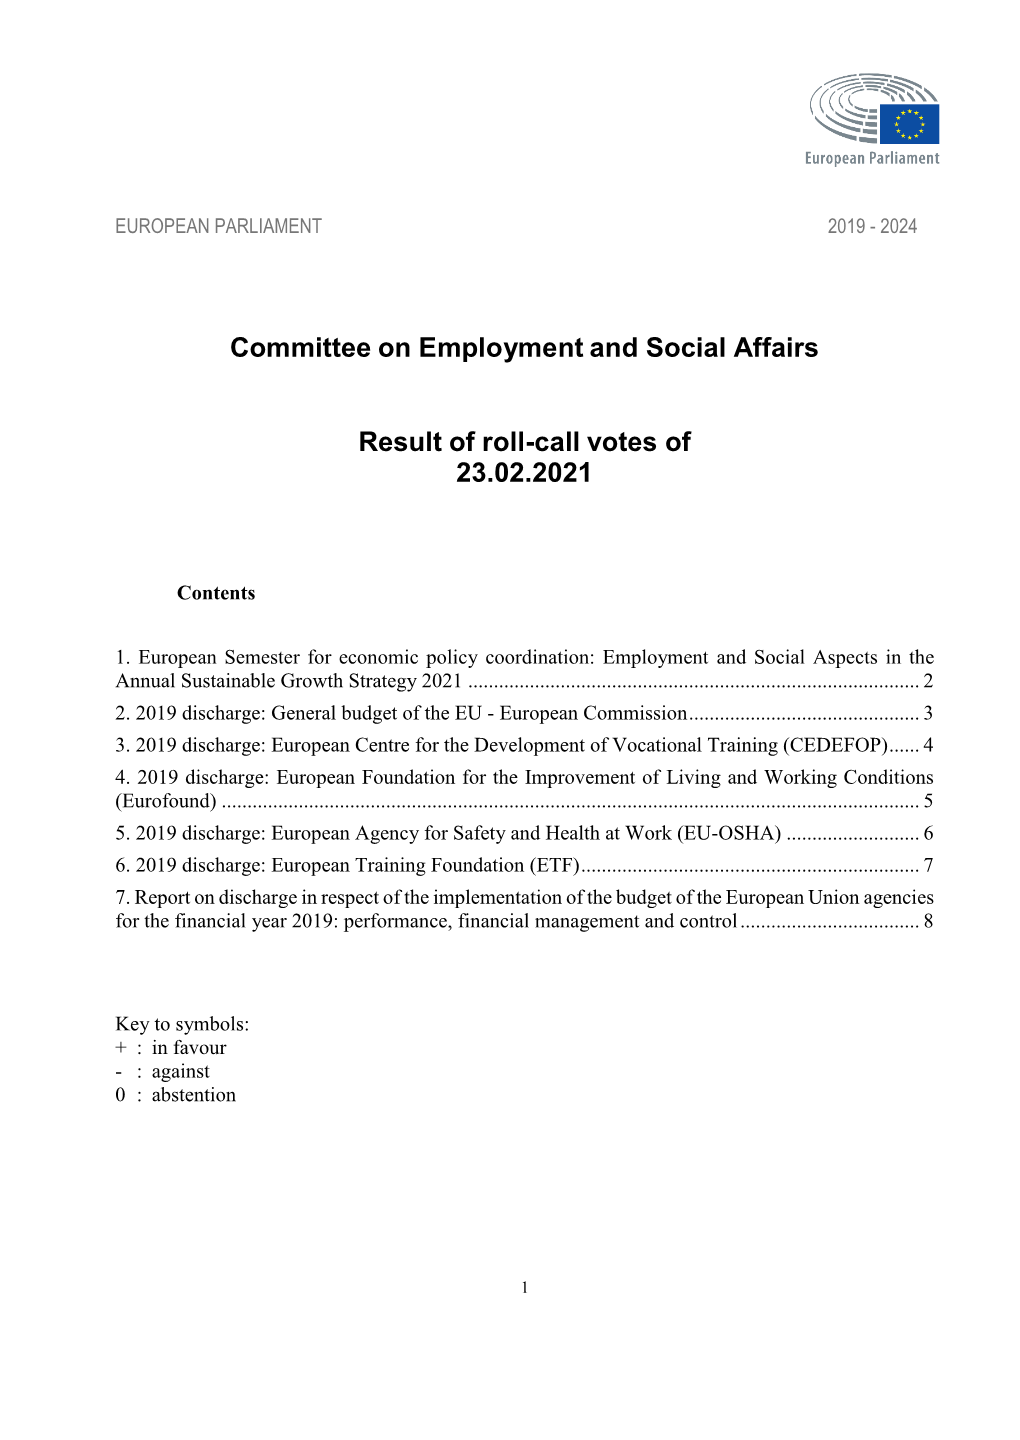 Committee on Employment and Social Affairs Result of Roll-Call Votes